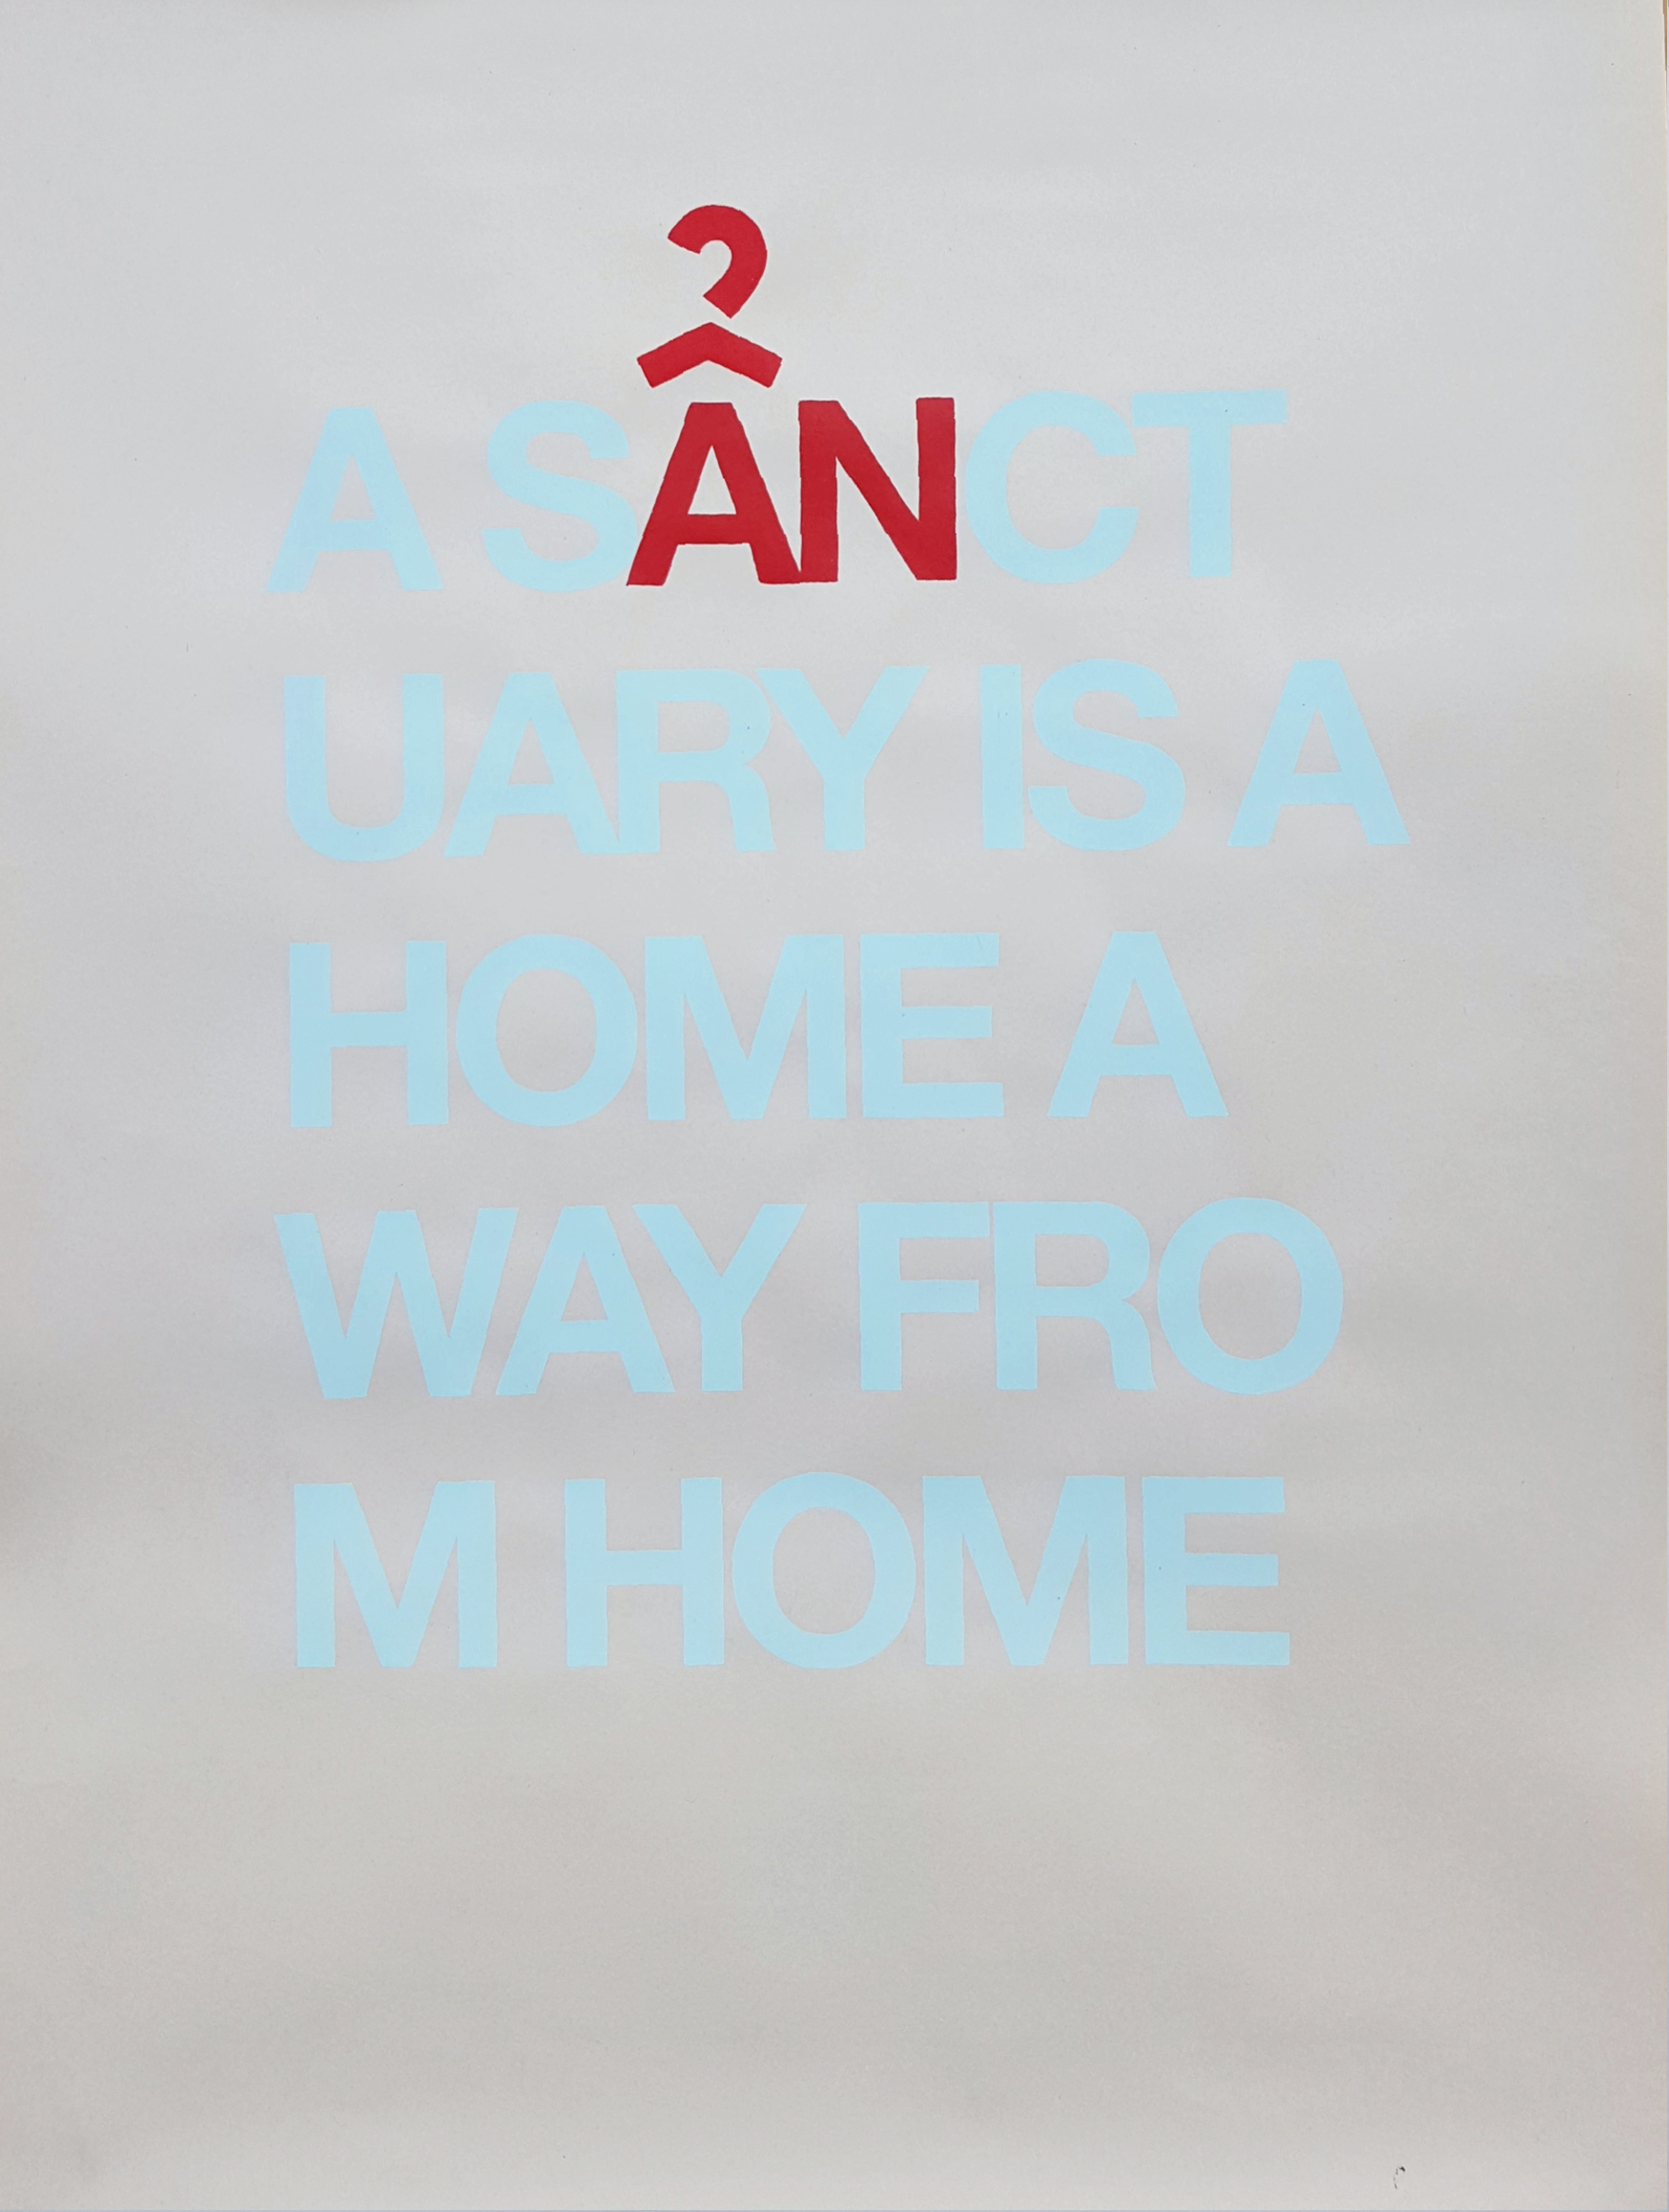 "A sẩnctuary is a home away from home" poster